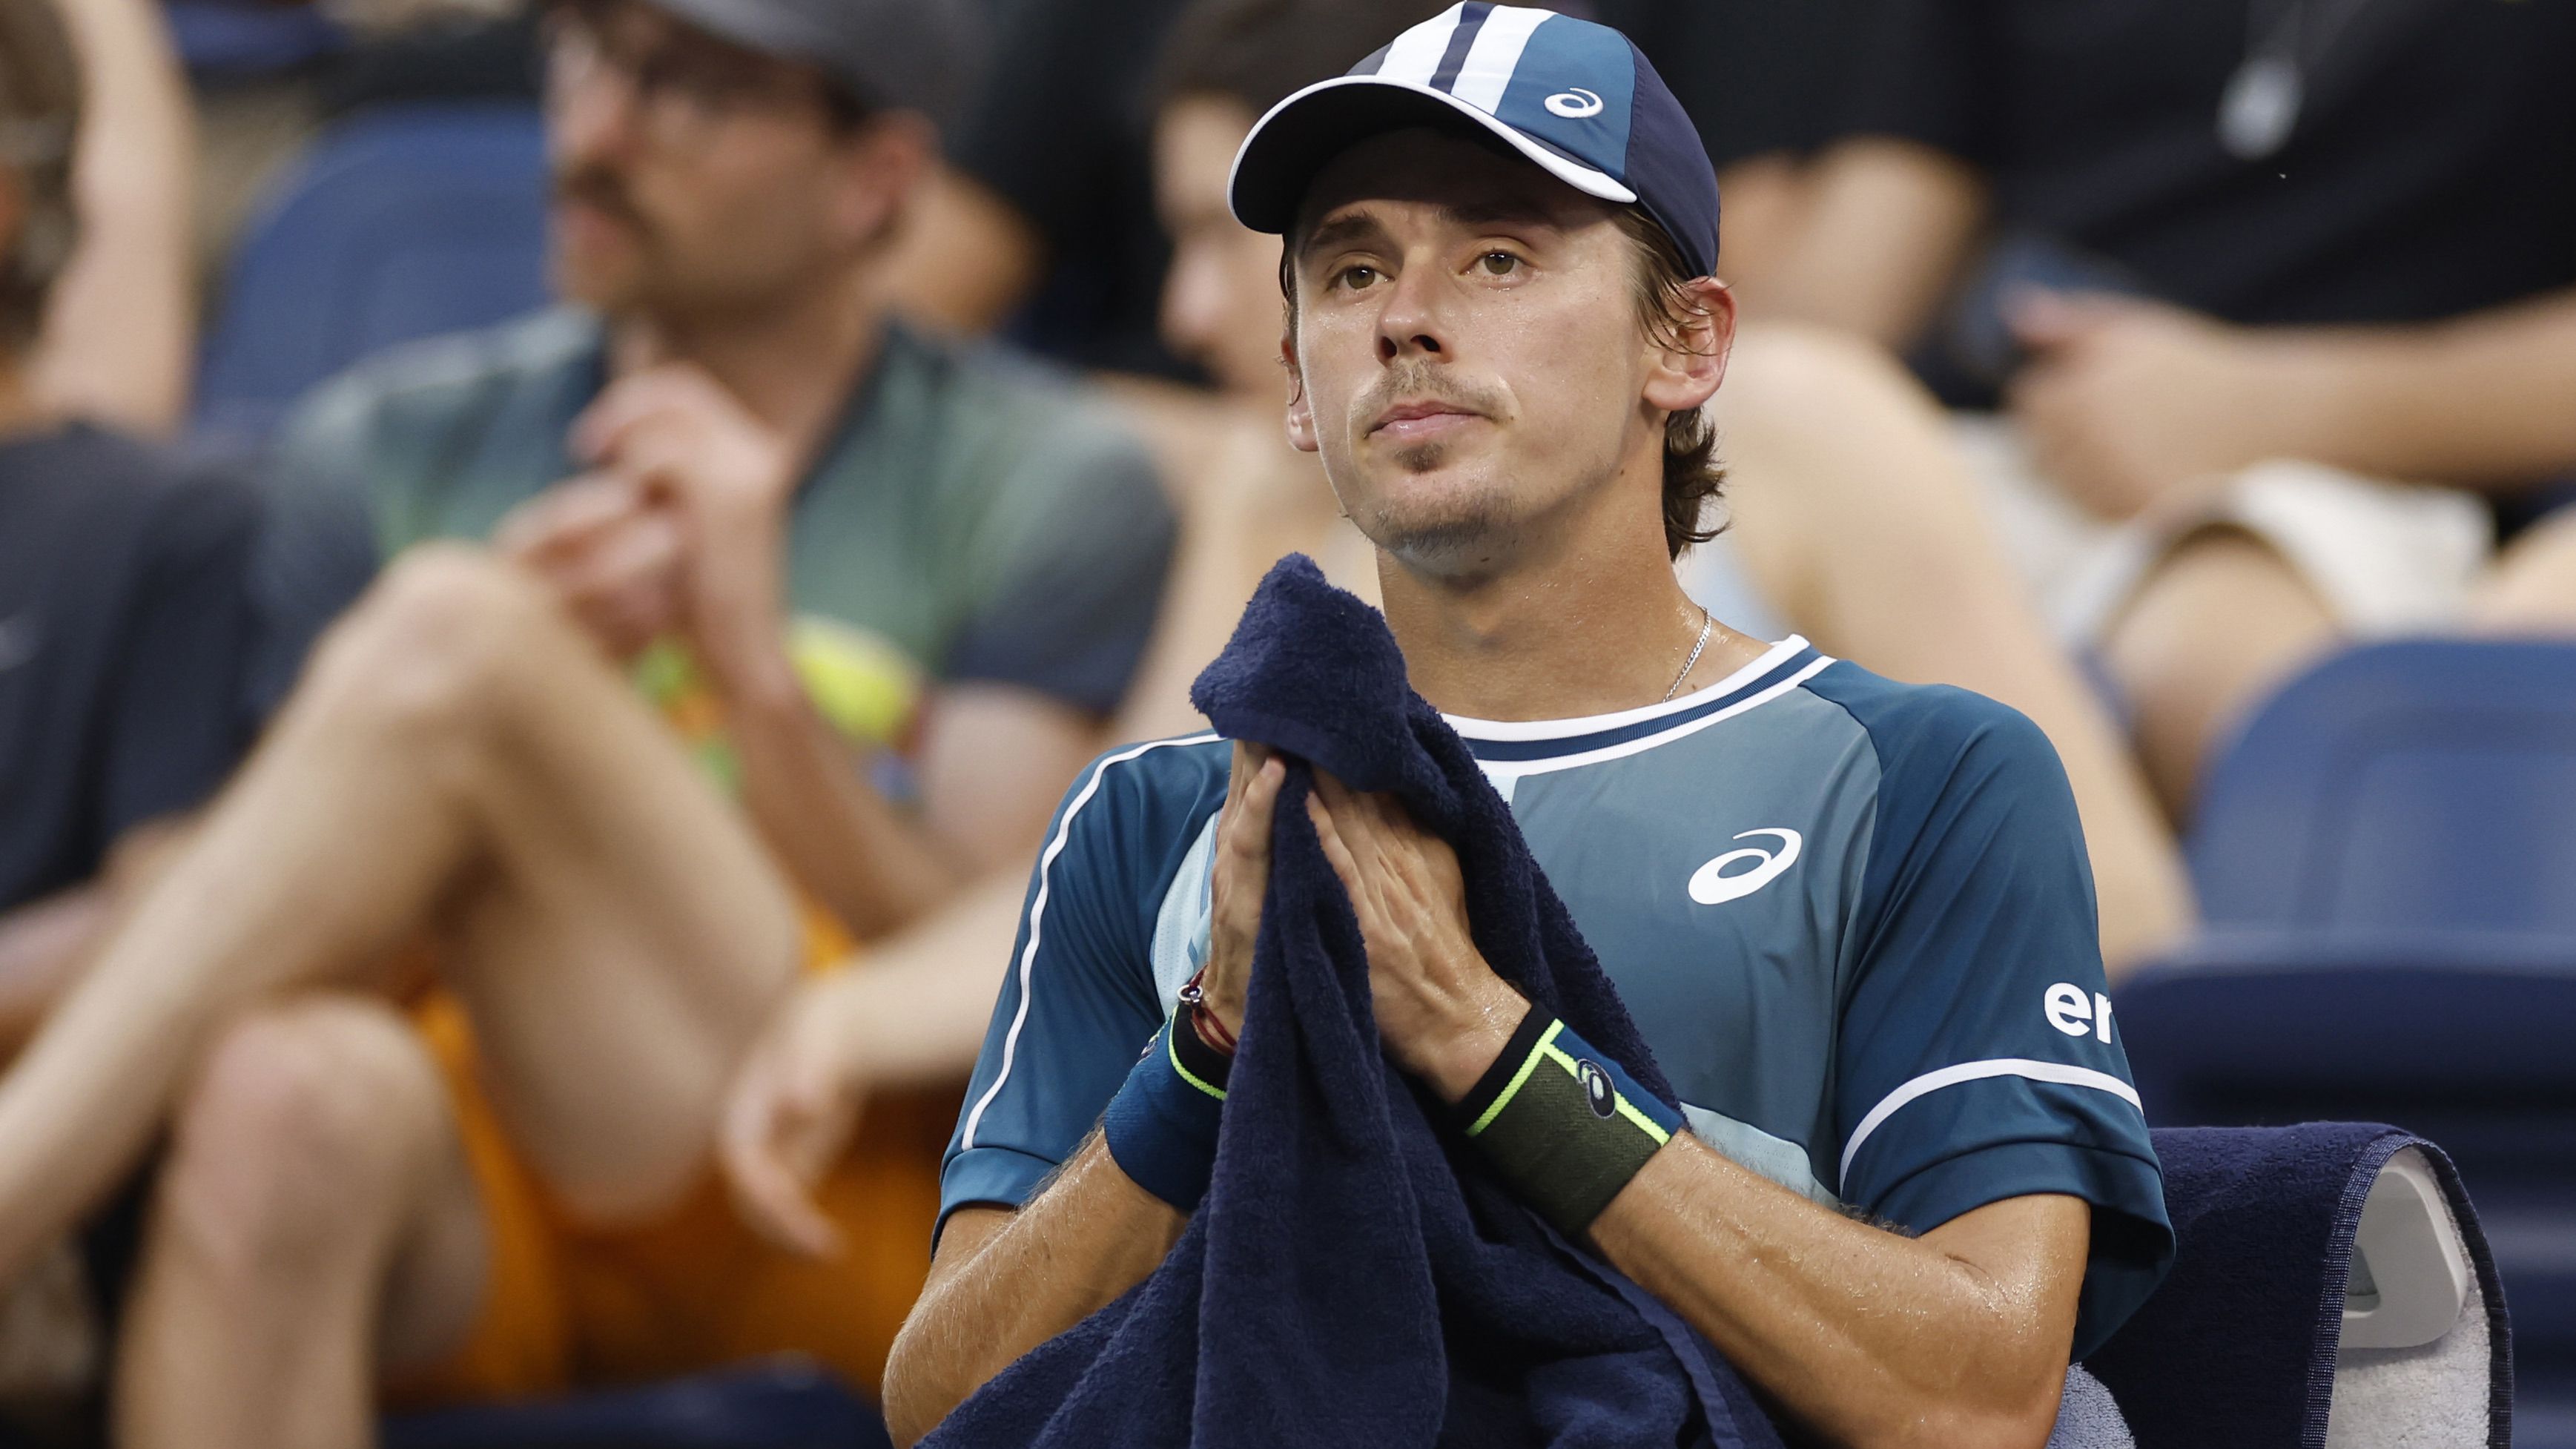 Todd Woodbridge calls Daniil Medvedev out for 'gamesmanship' and implores tennis to crack down